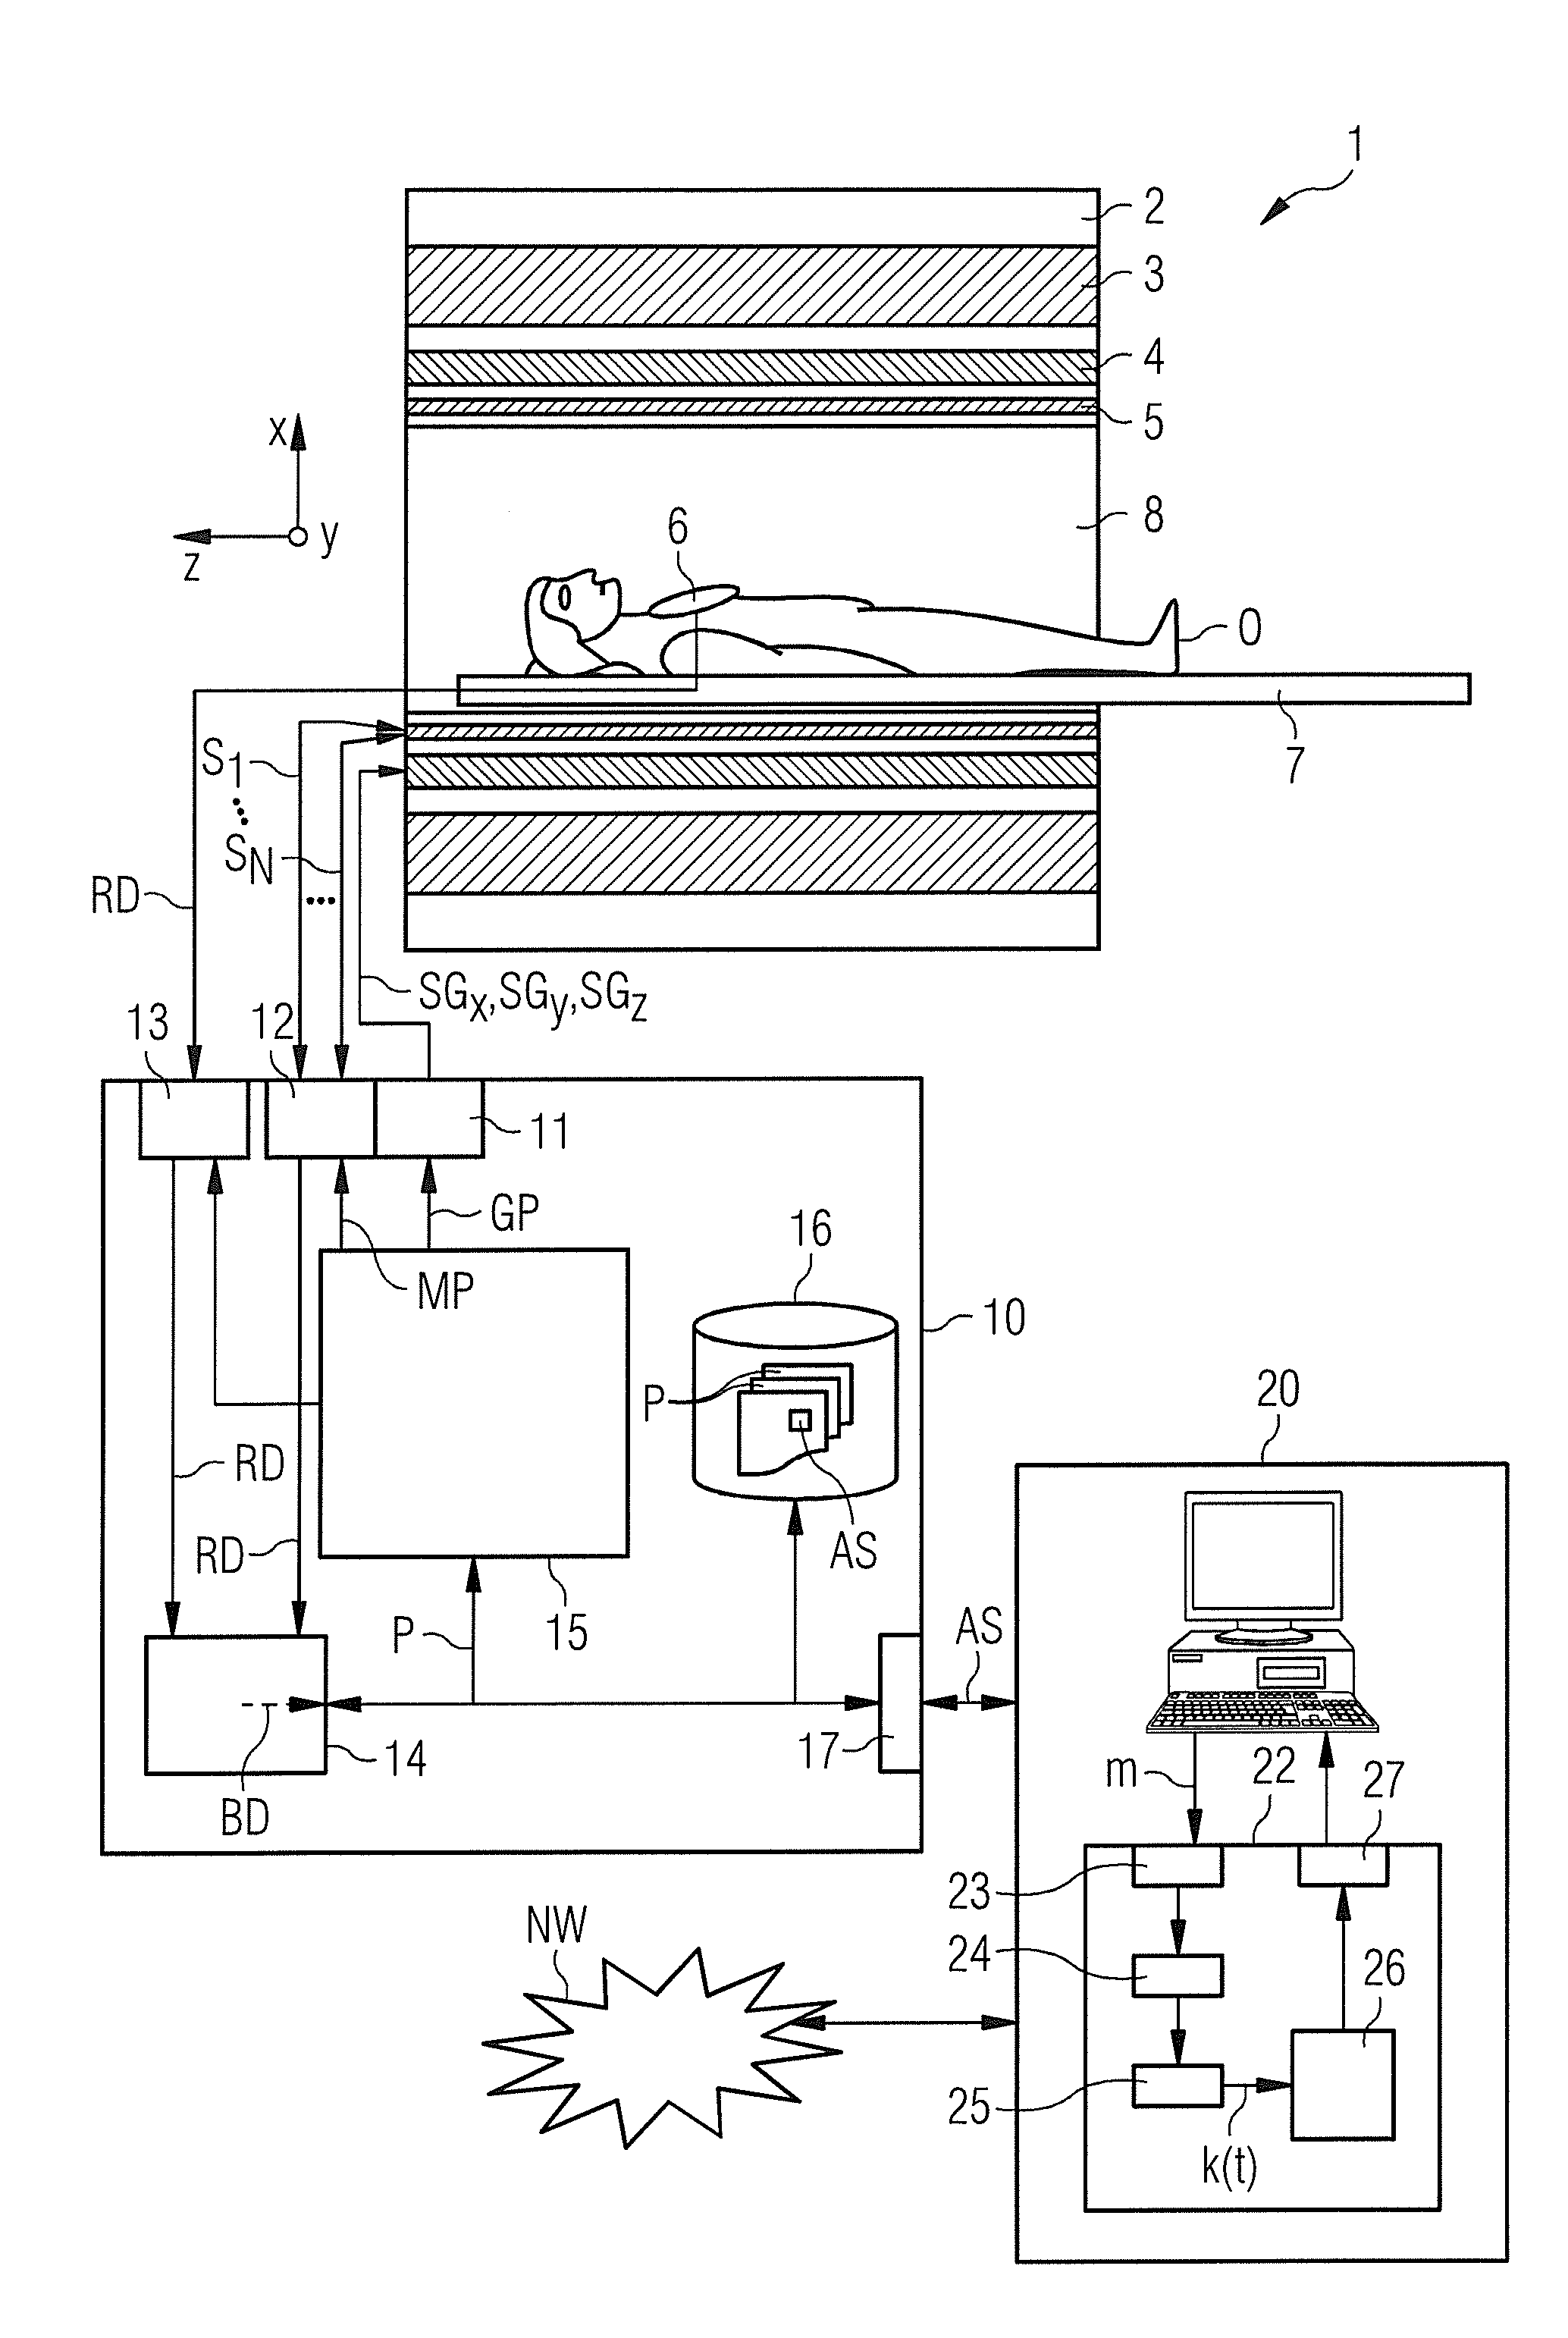 Determination of a magnetic resonance system control sequence